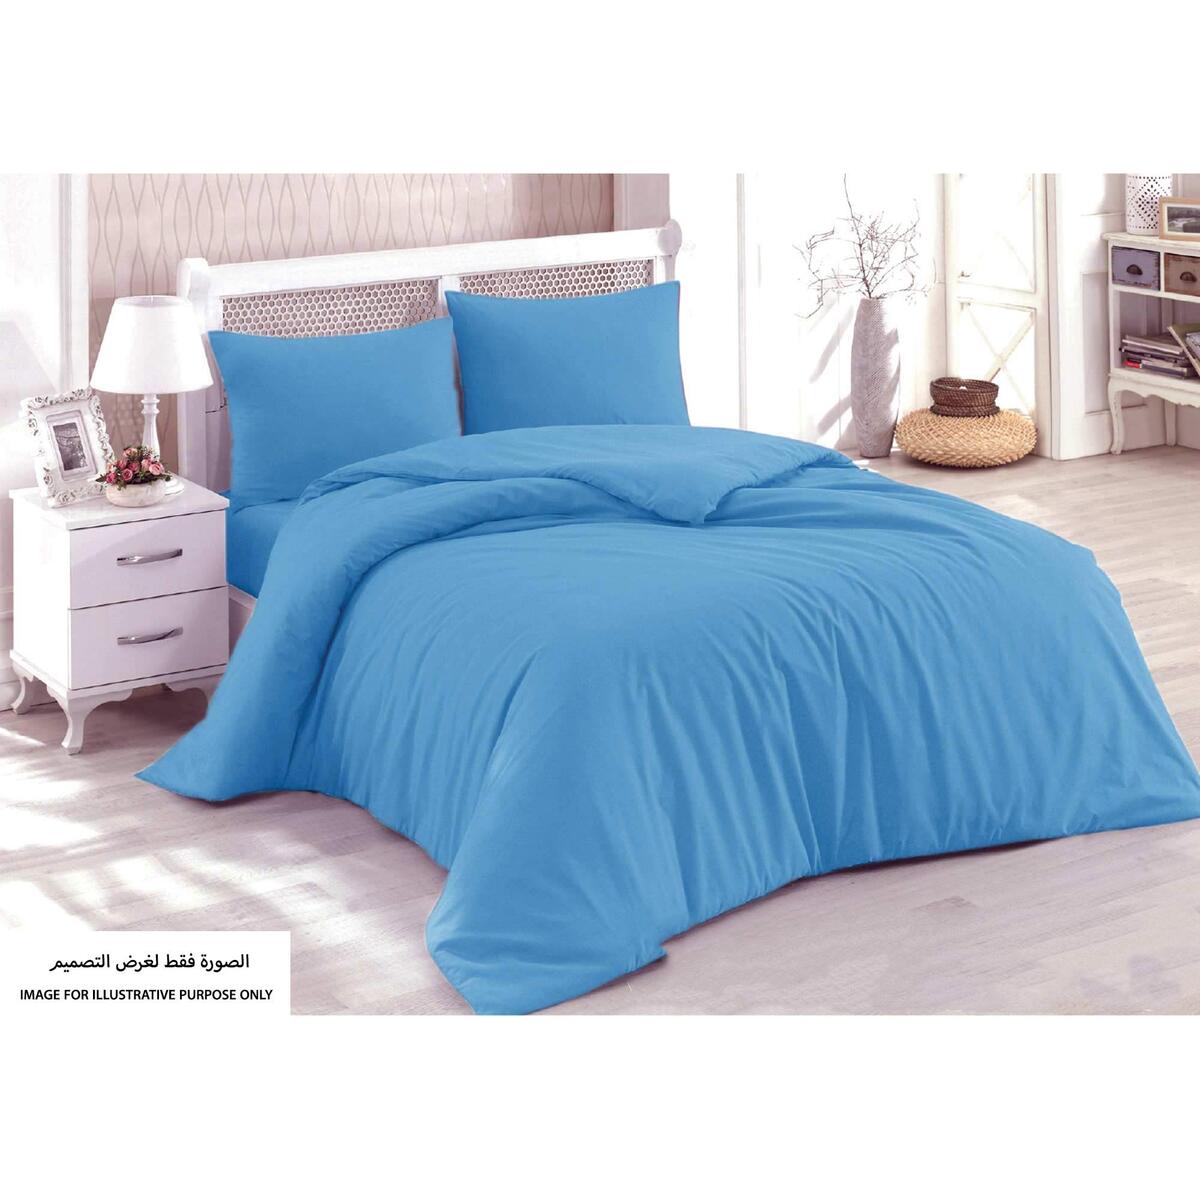 Homewell Quilt Cover Single 2 pc Set Blue